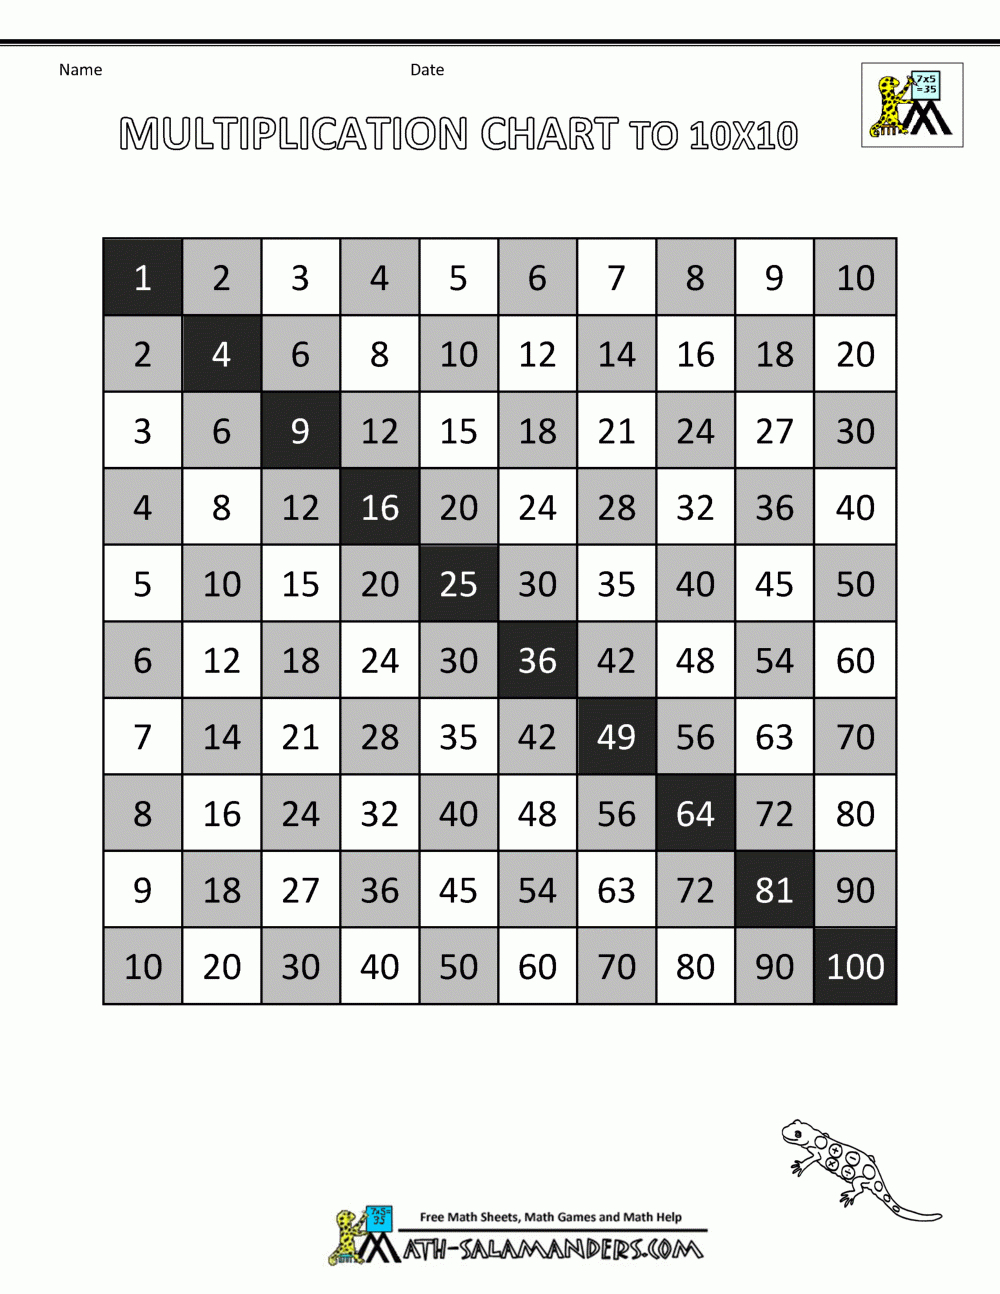 Multiplication Times Table Chart intended for Printable Multiplication Facts Chart